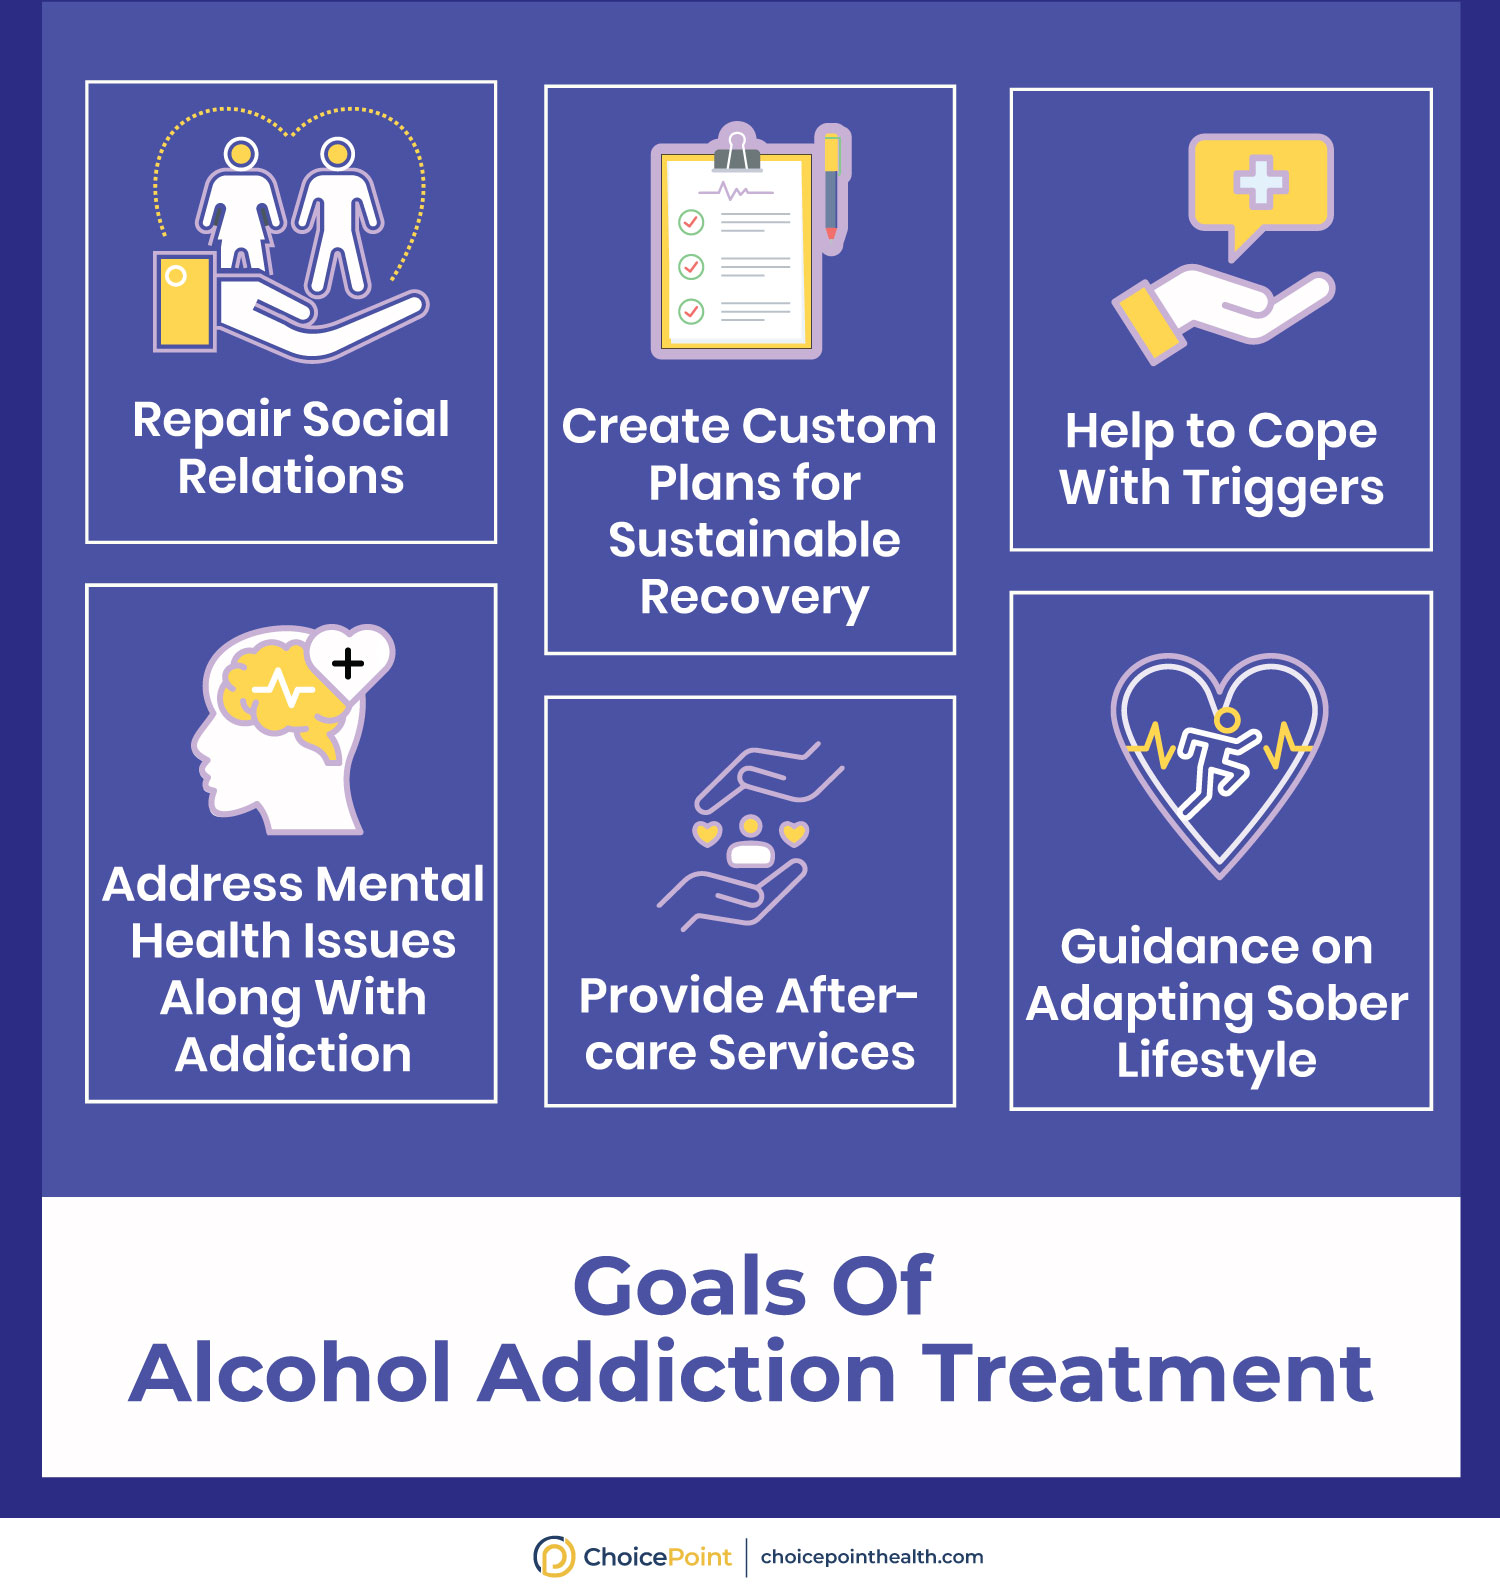 Treatment Goals For Alcohol Use Disorder